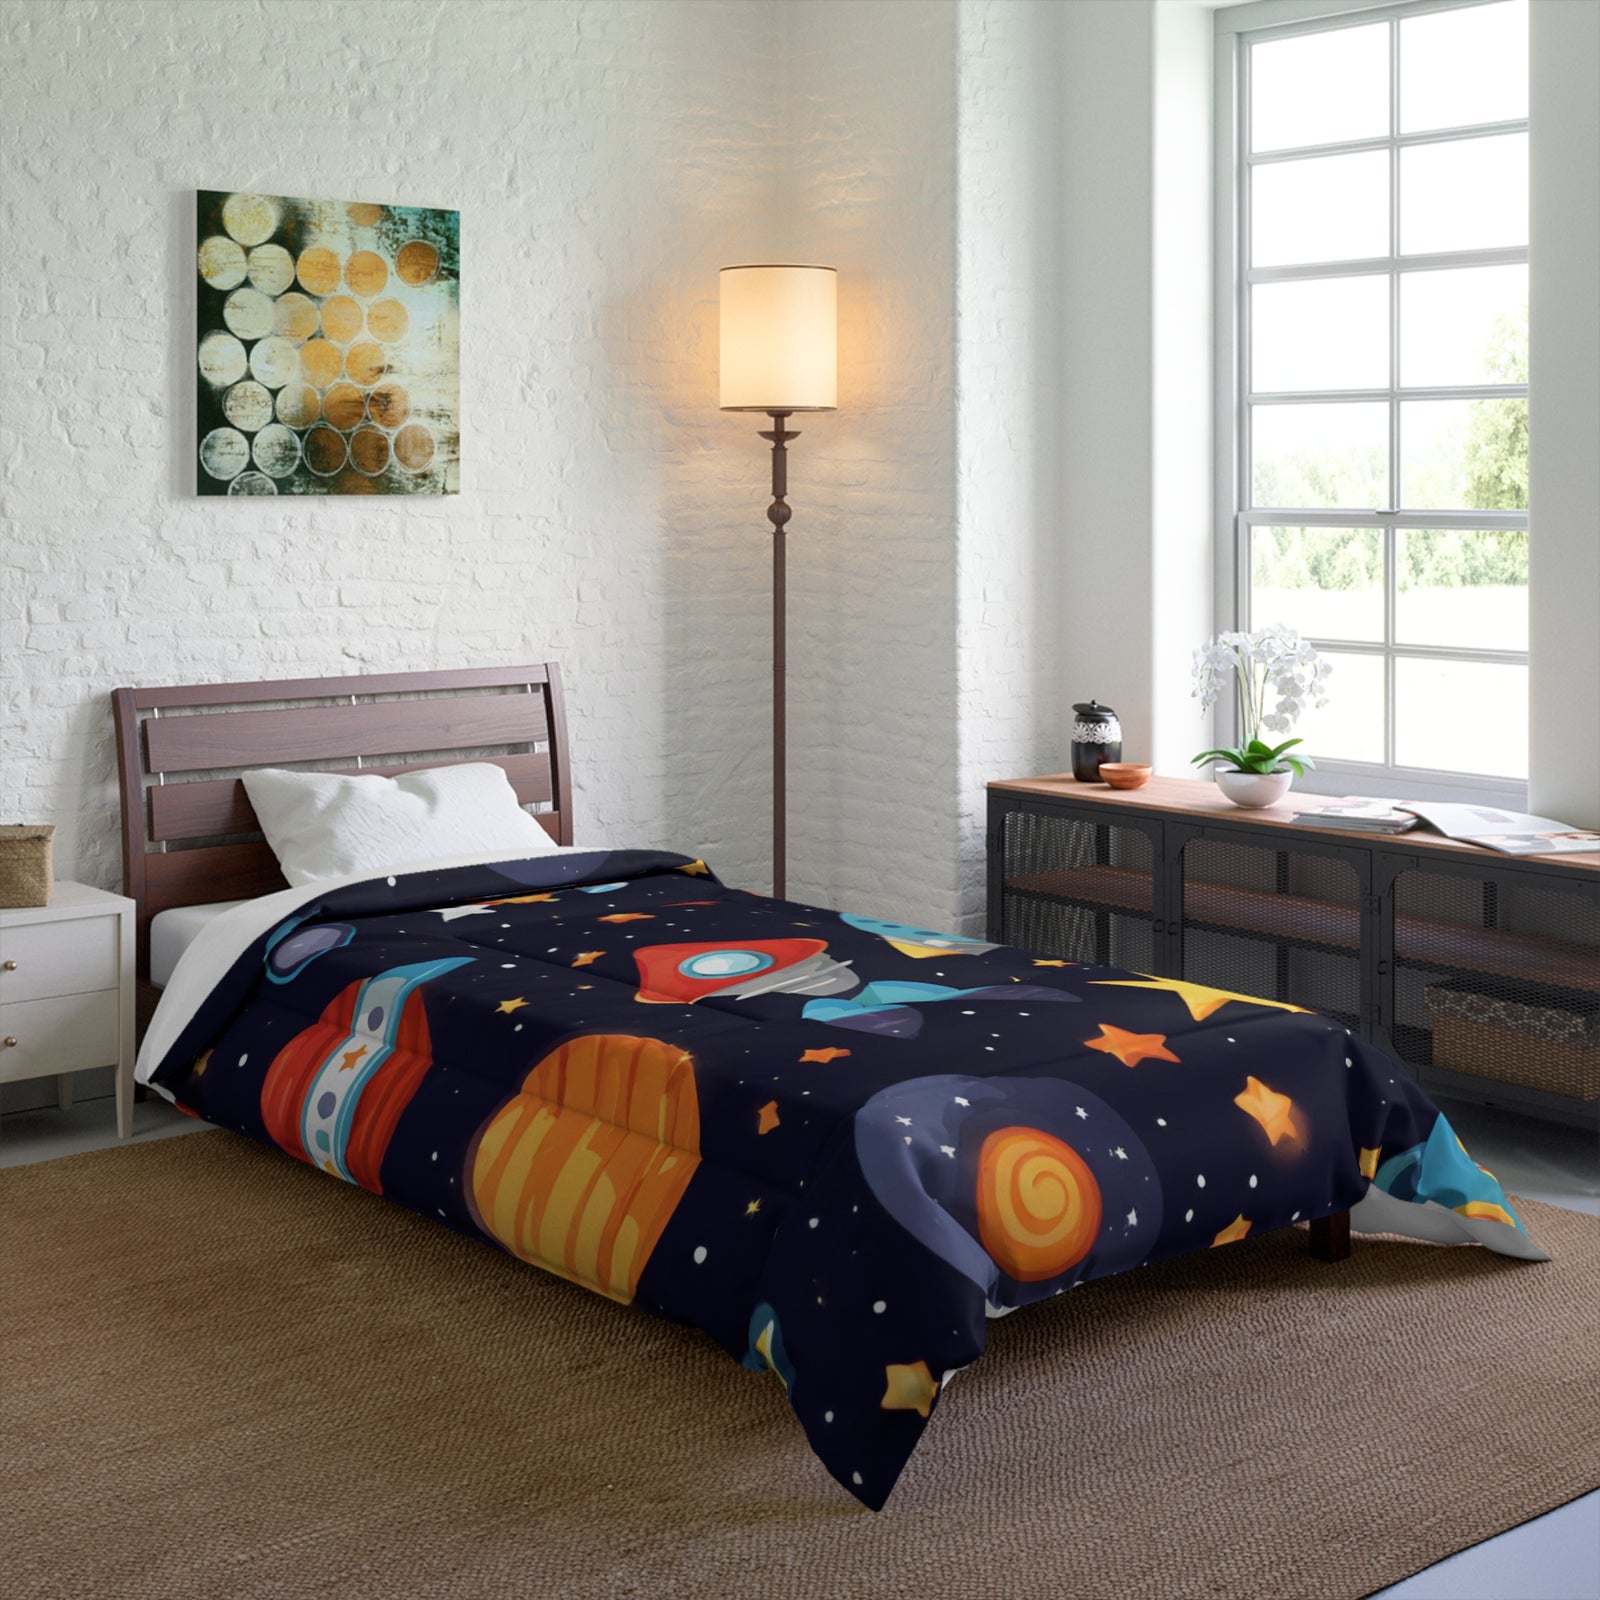 Galactic Dreams Comforter: Whimsical Stars, Sky, Galaxy Spaceships, and Fun Imagery for Kids